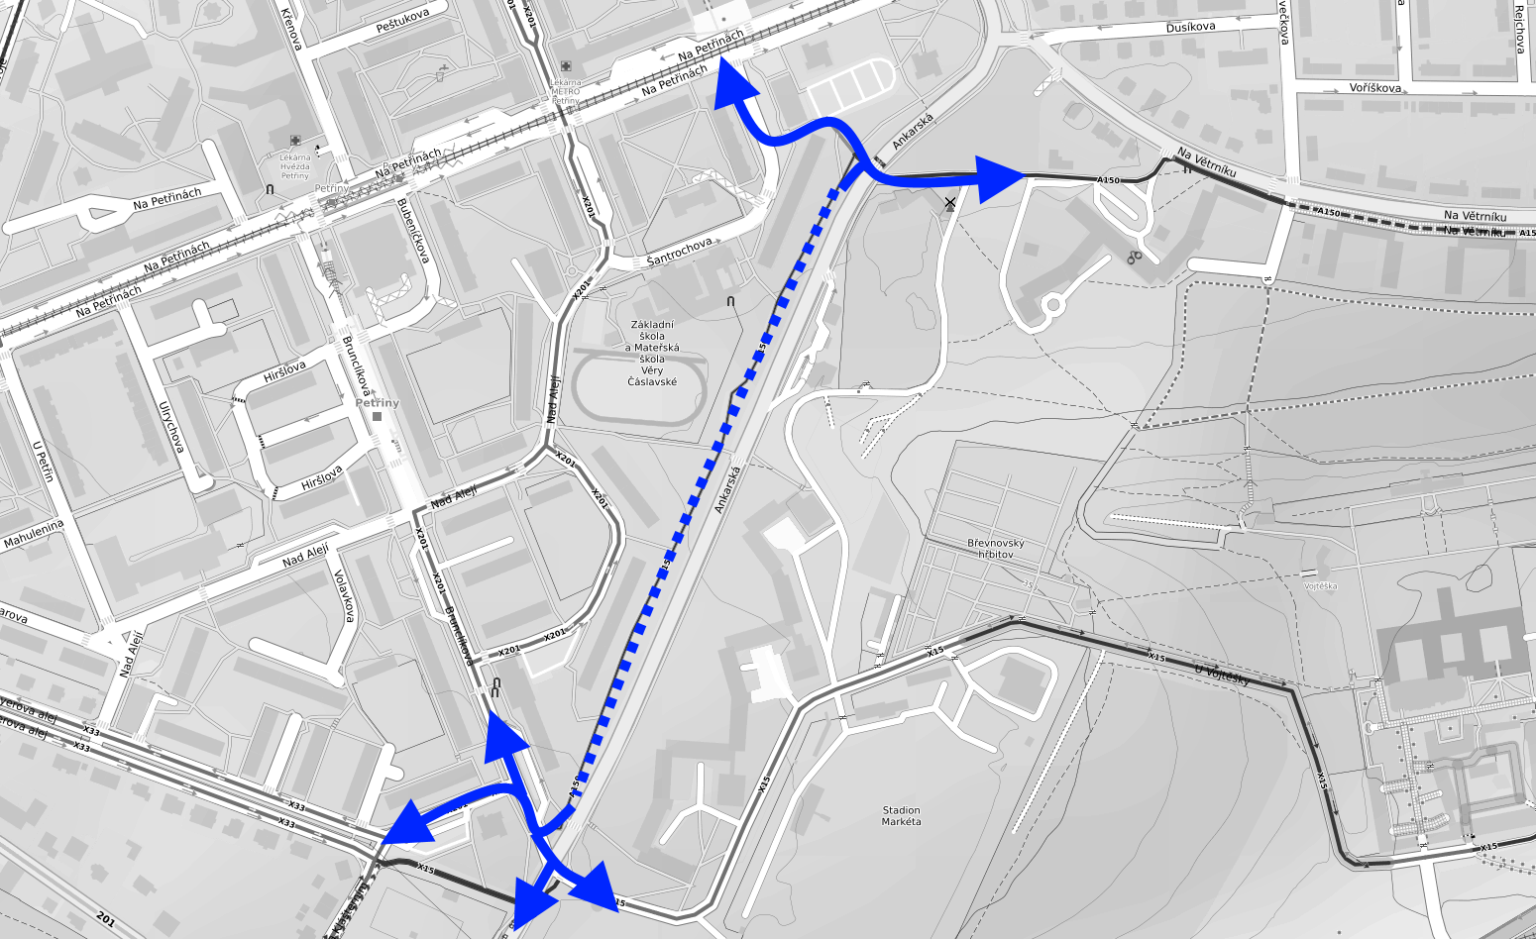 The most significant connections of the just marked section of the pathway are to the A150 cycle route.